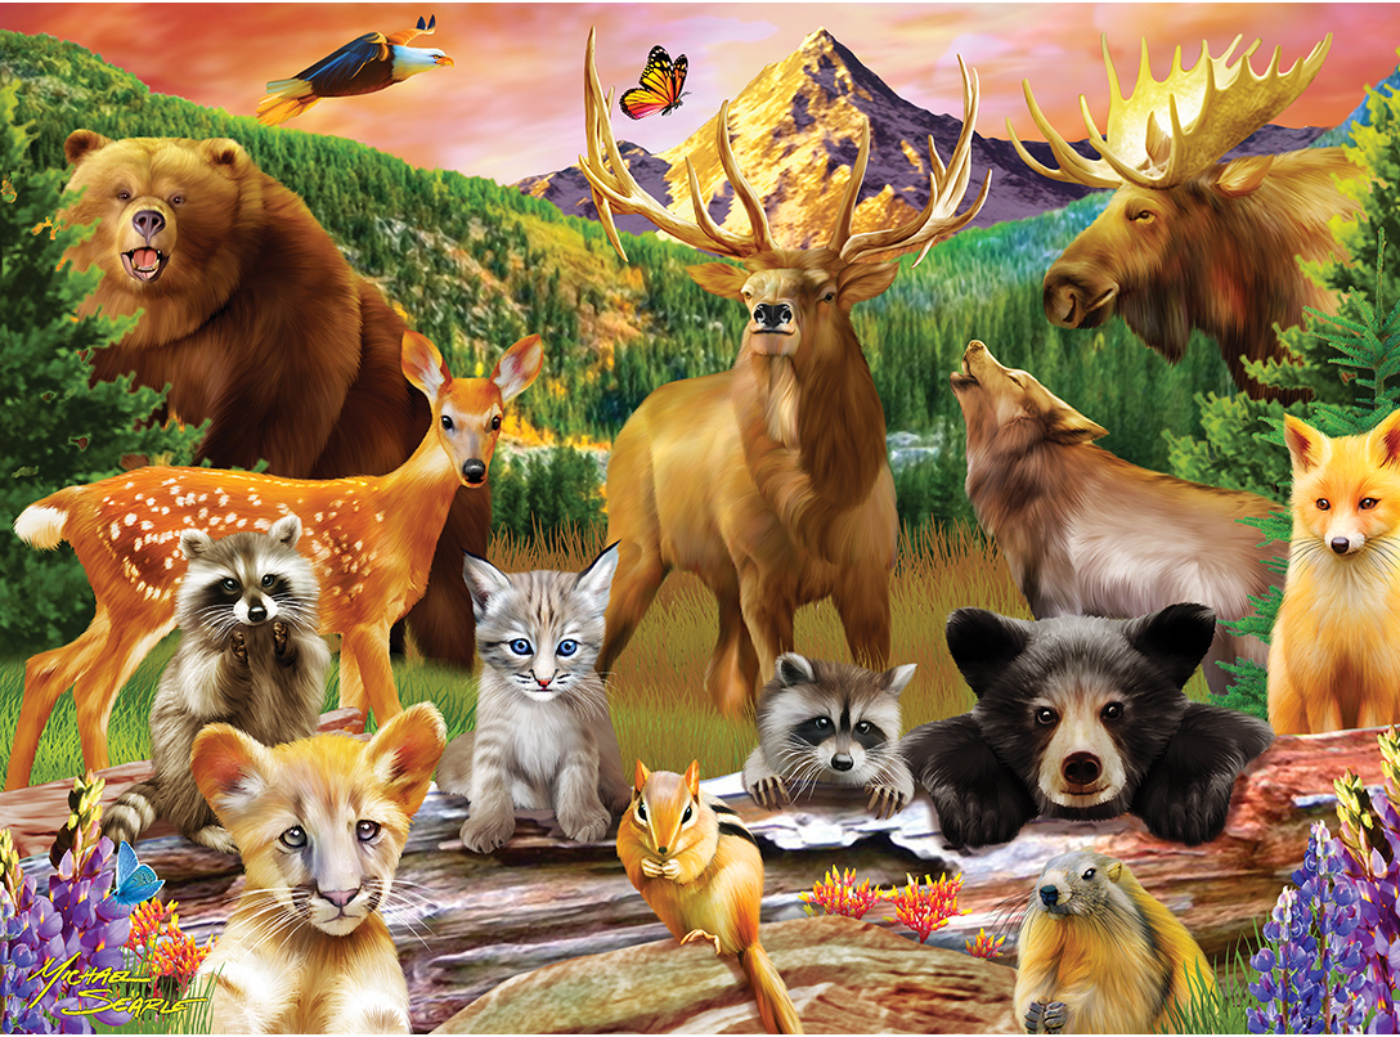 Wildlife of the National Parks - Scratch and Dent Forest Animal Jigsaw Puzzle